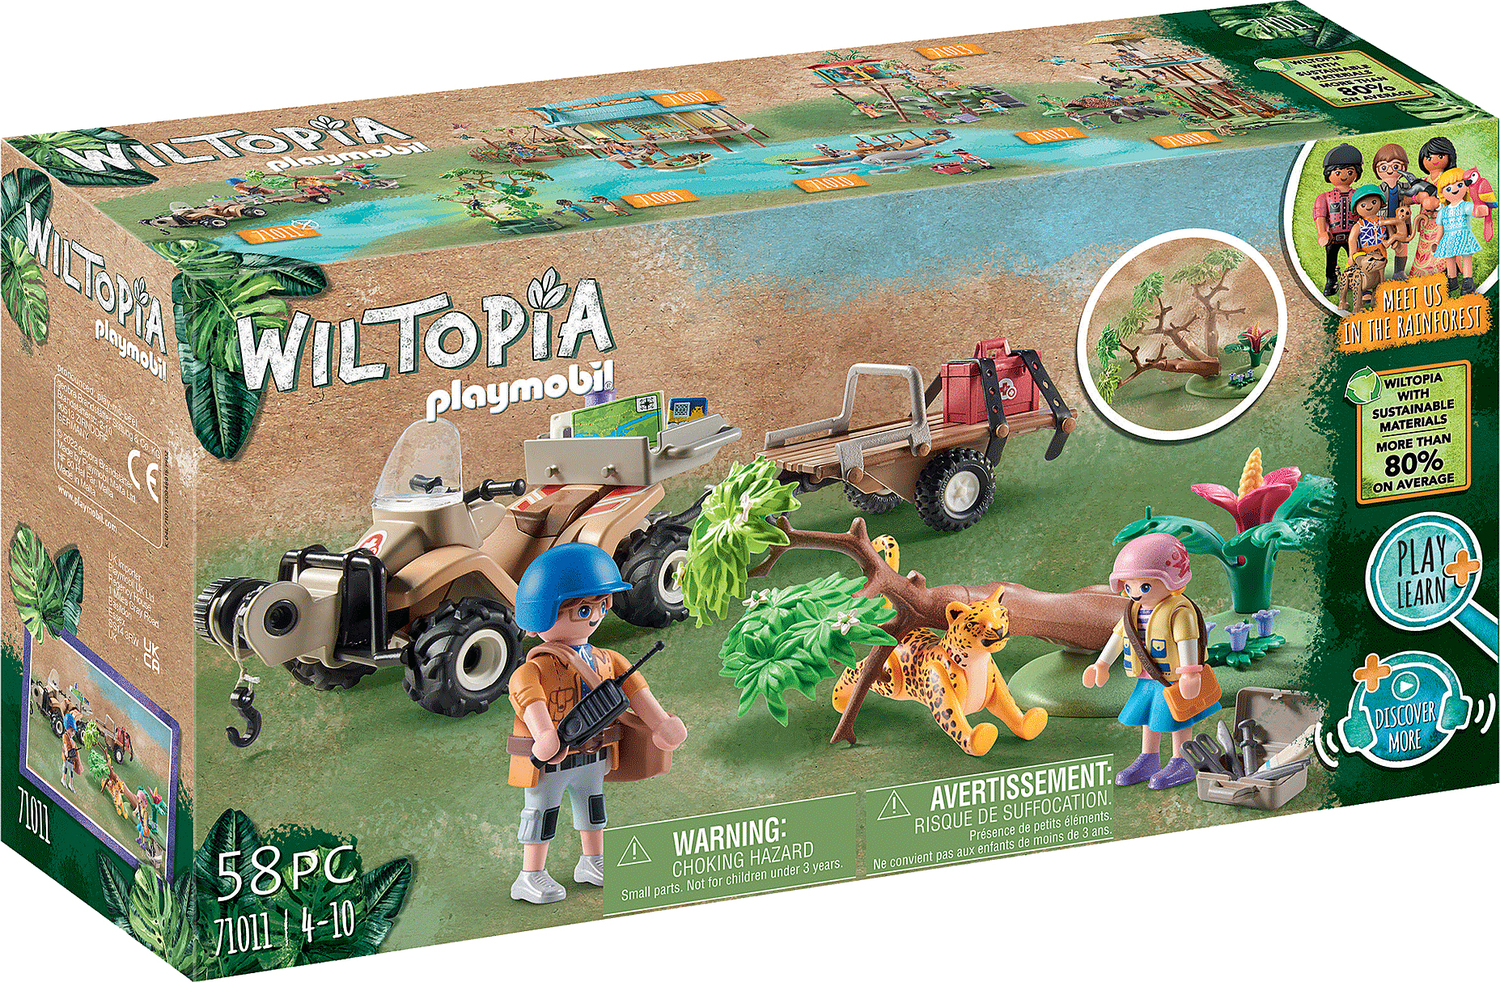  Playmobil Wiltopia Research Tower with Compass : Toys & Games